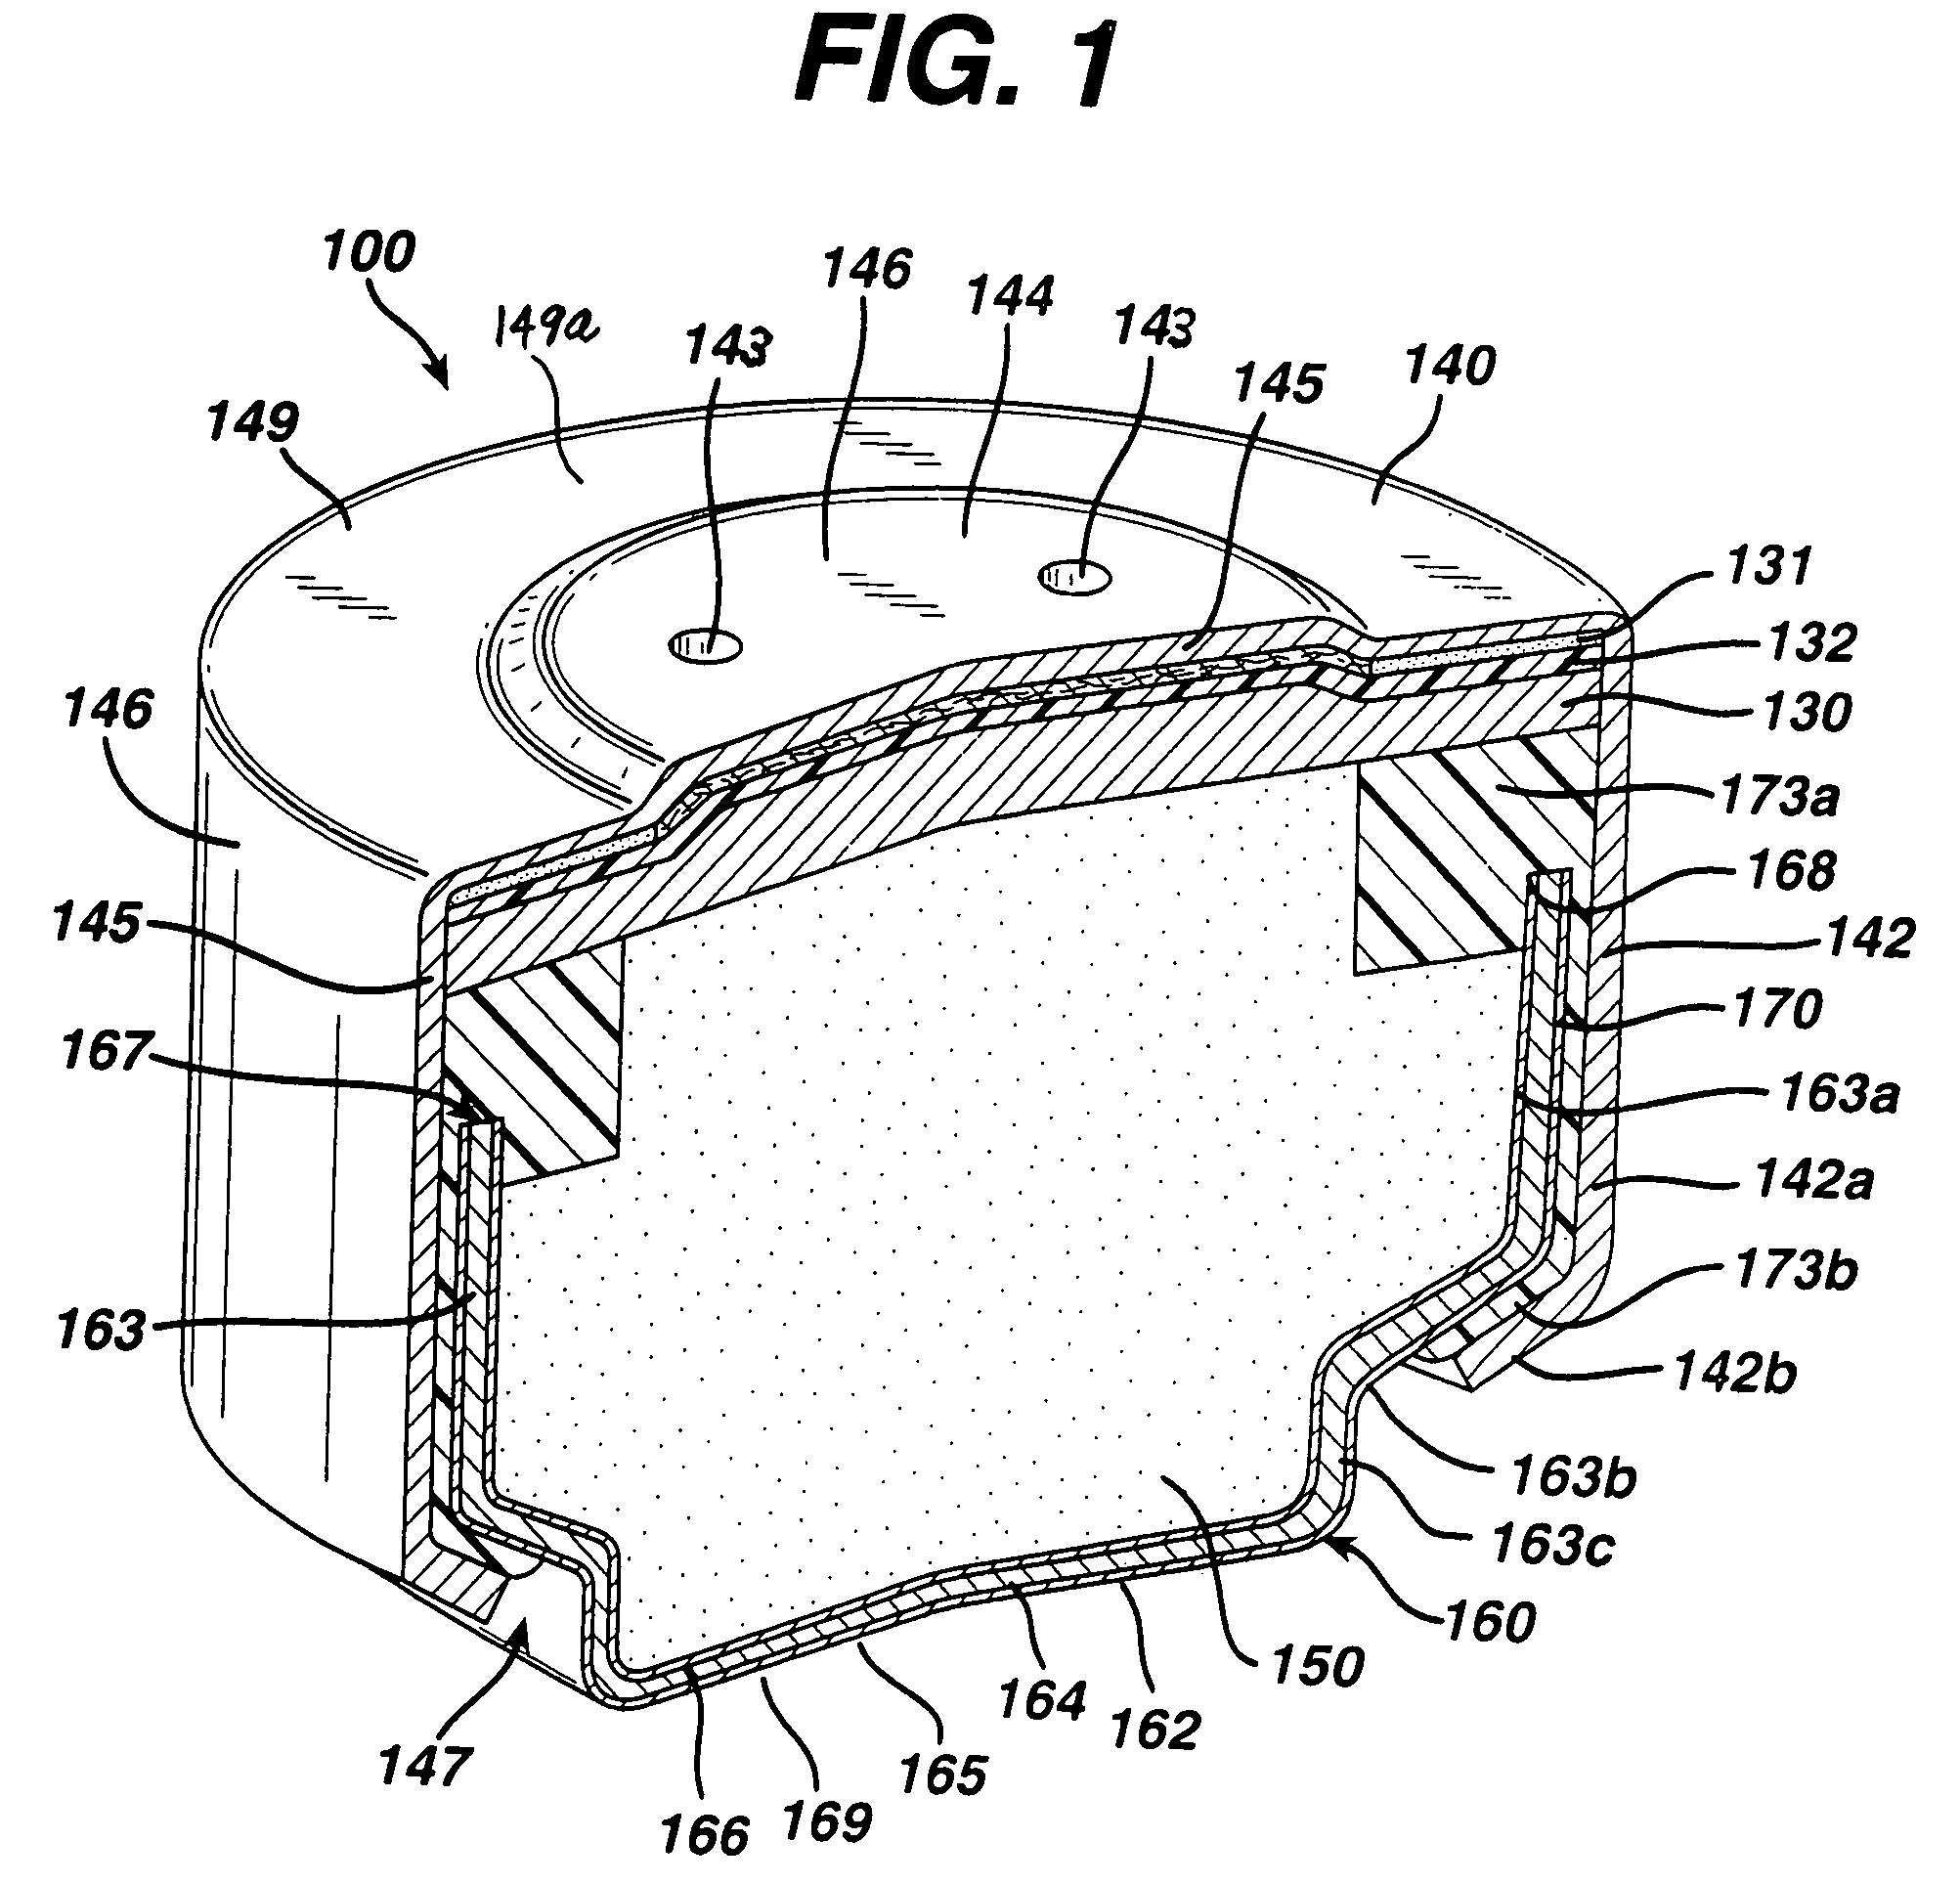 Method of forming a nickel layer on the cathode casing for a zinc-air cell